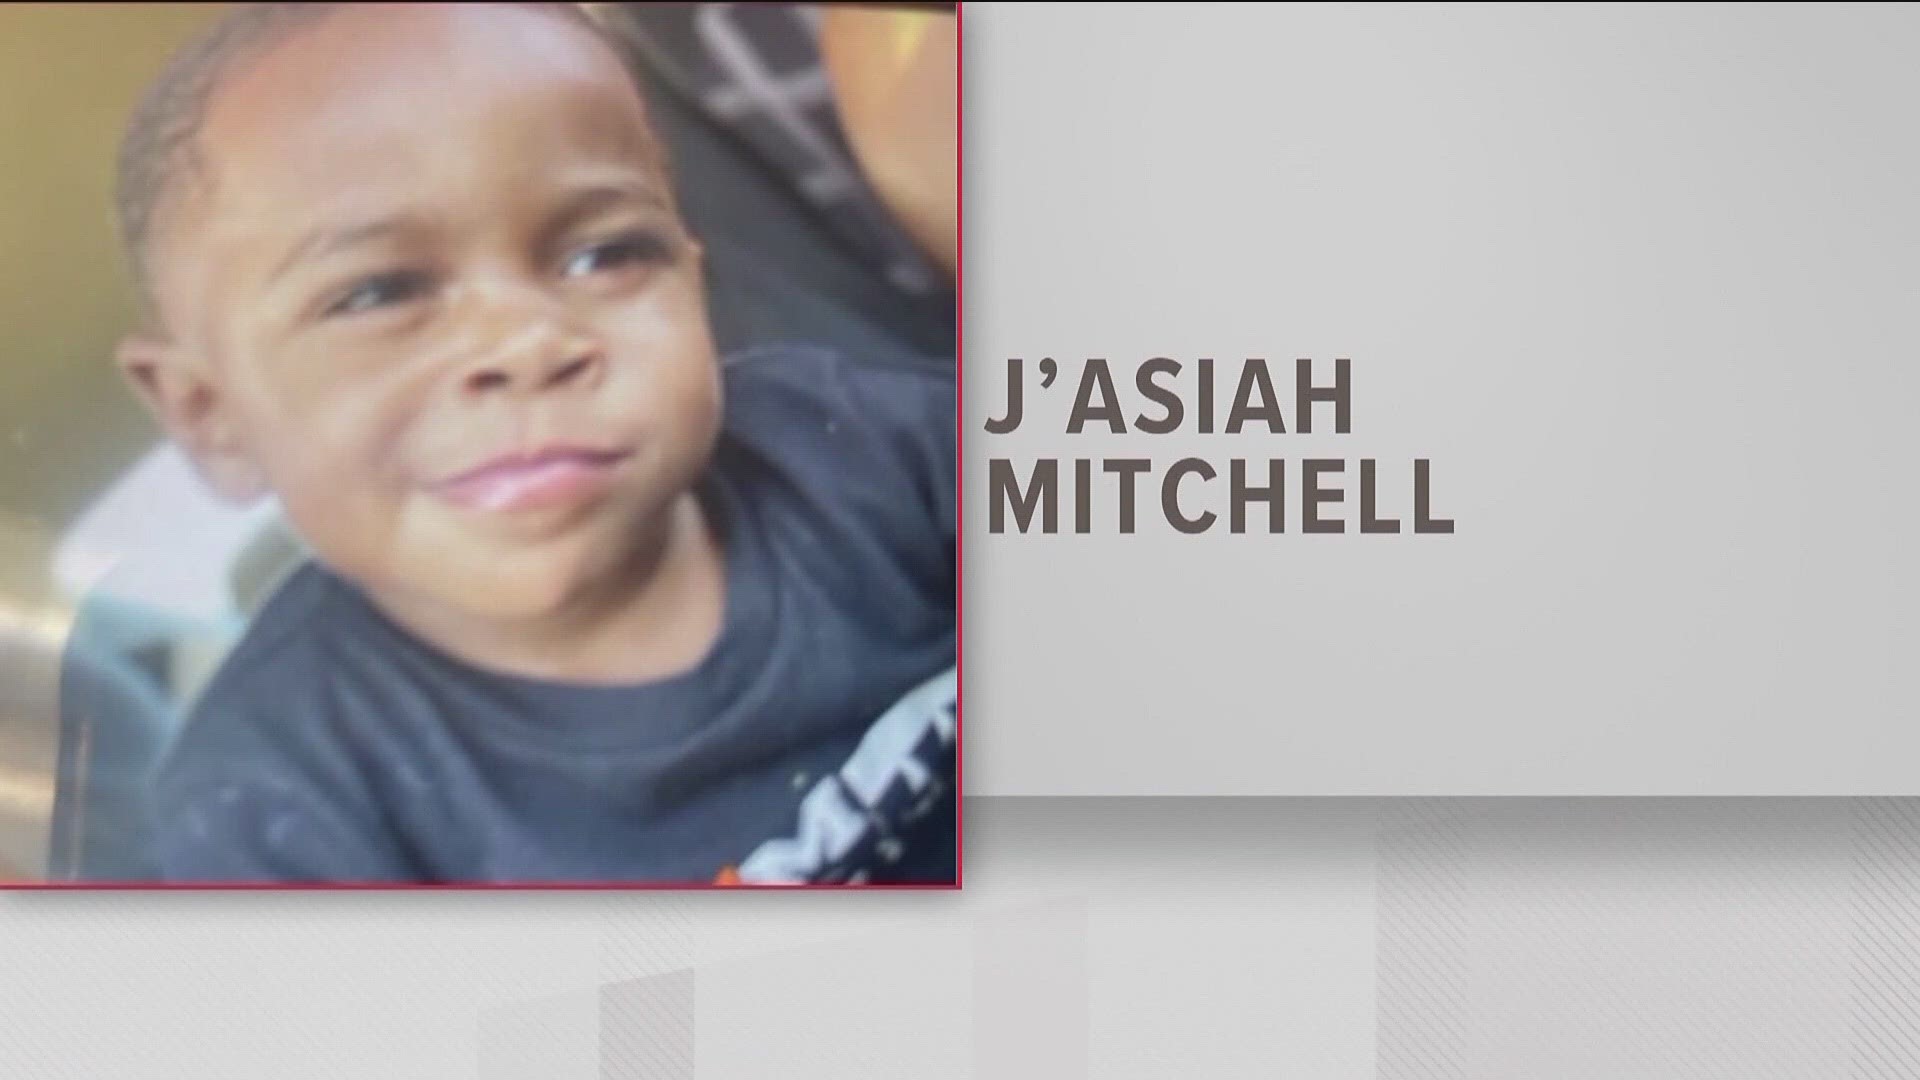 Artavious North is in custody and charged with false report of a crime after he initially said 2-year-old J'Asiah Mitchell was kidnapped.